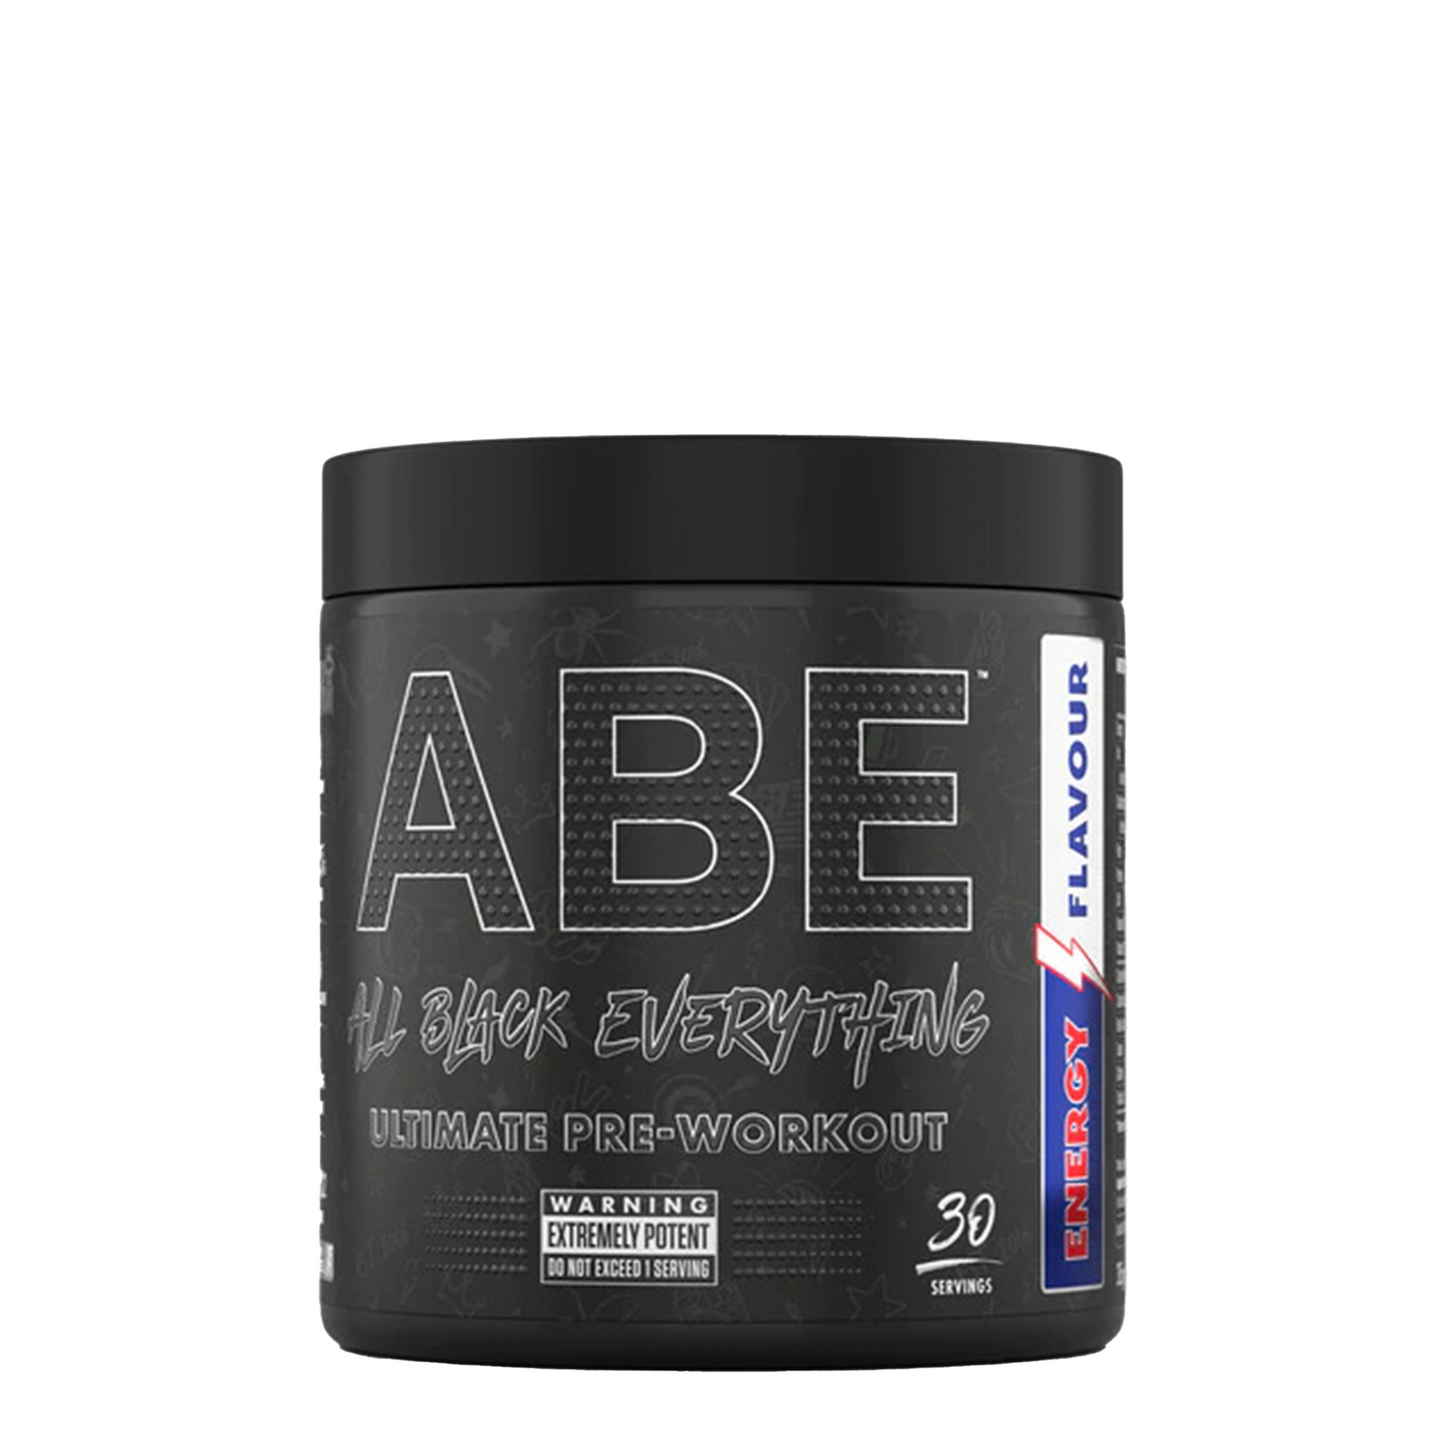 Applied Nutrition ABE Pre Workout | 315g